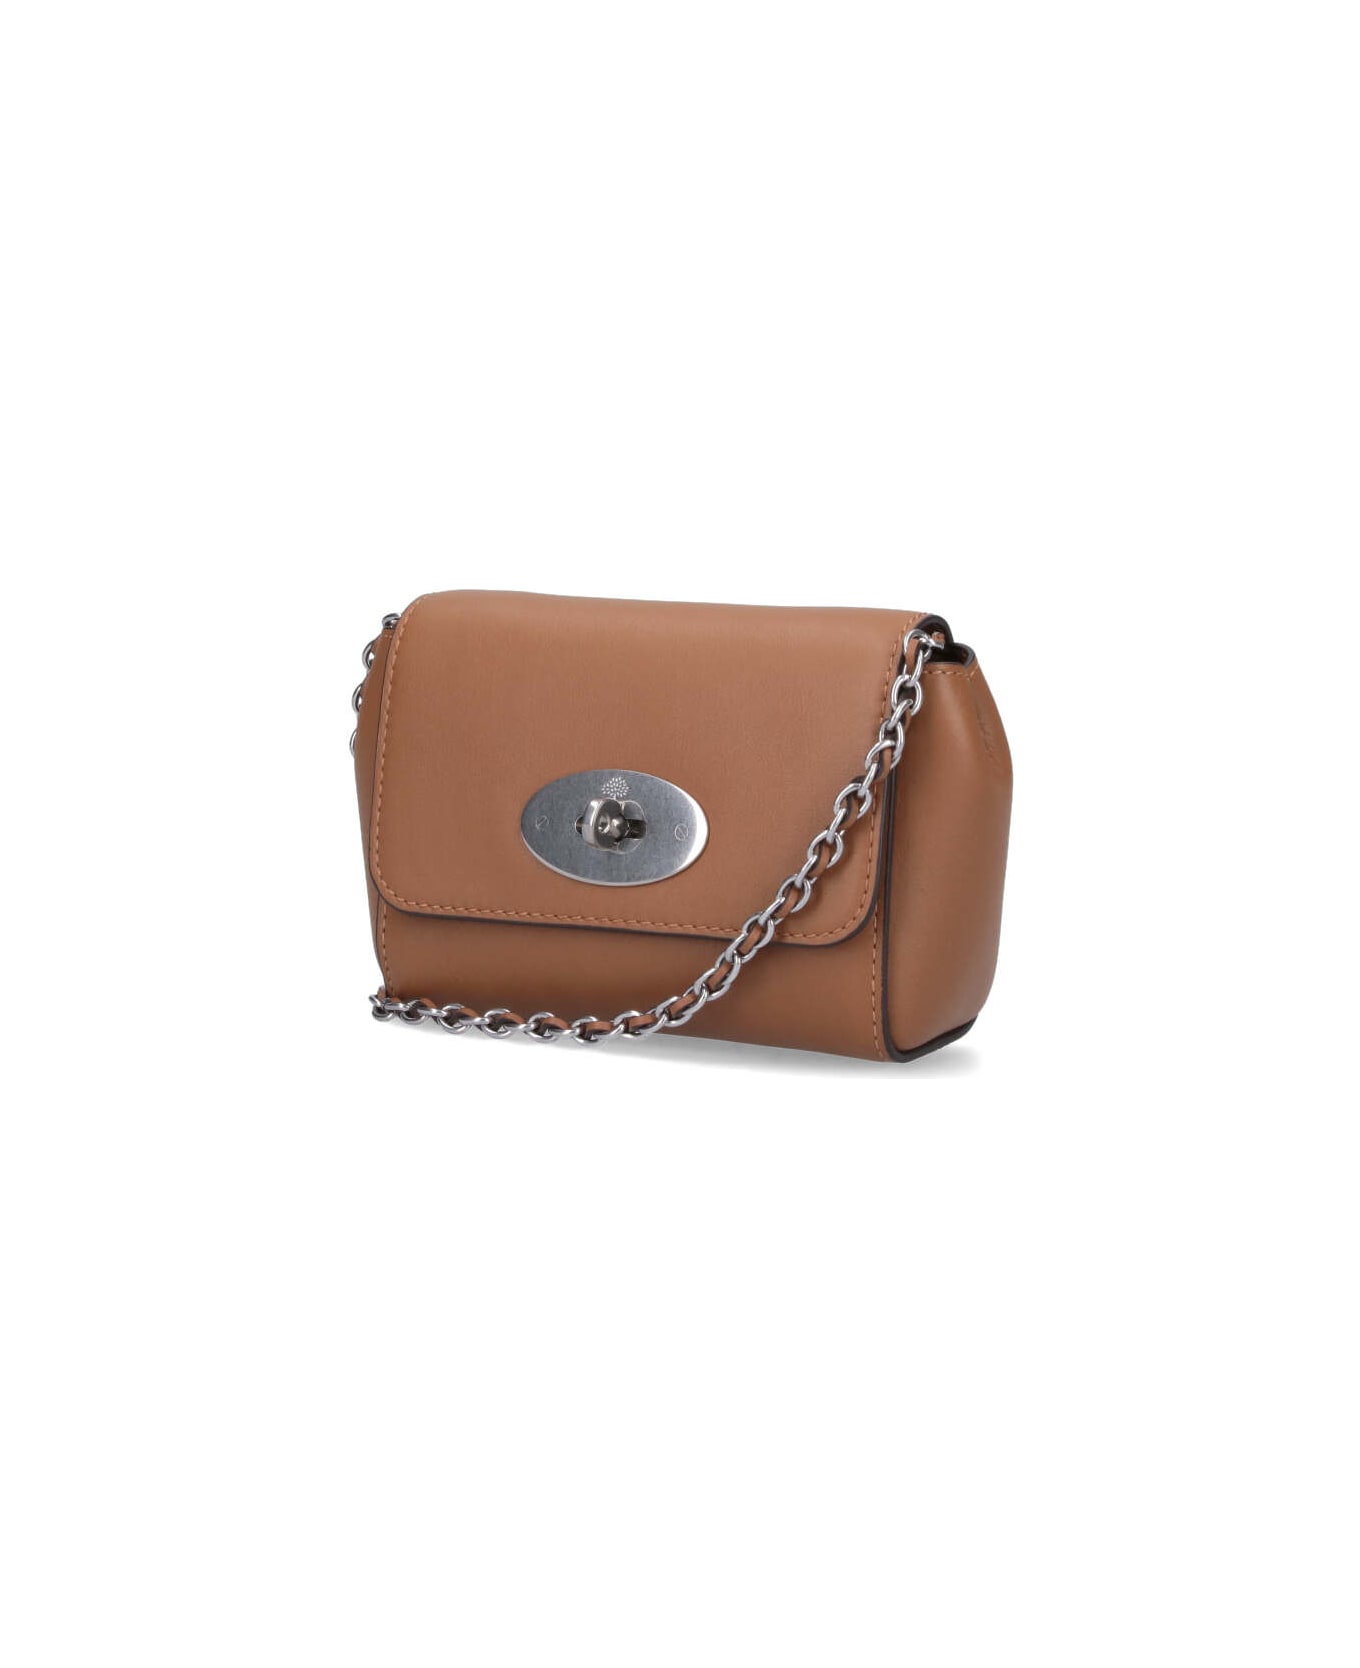 Mulberry "mini Lily" Bag - Brown